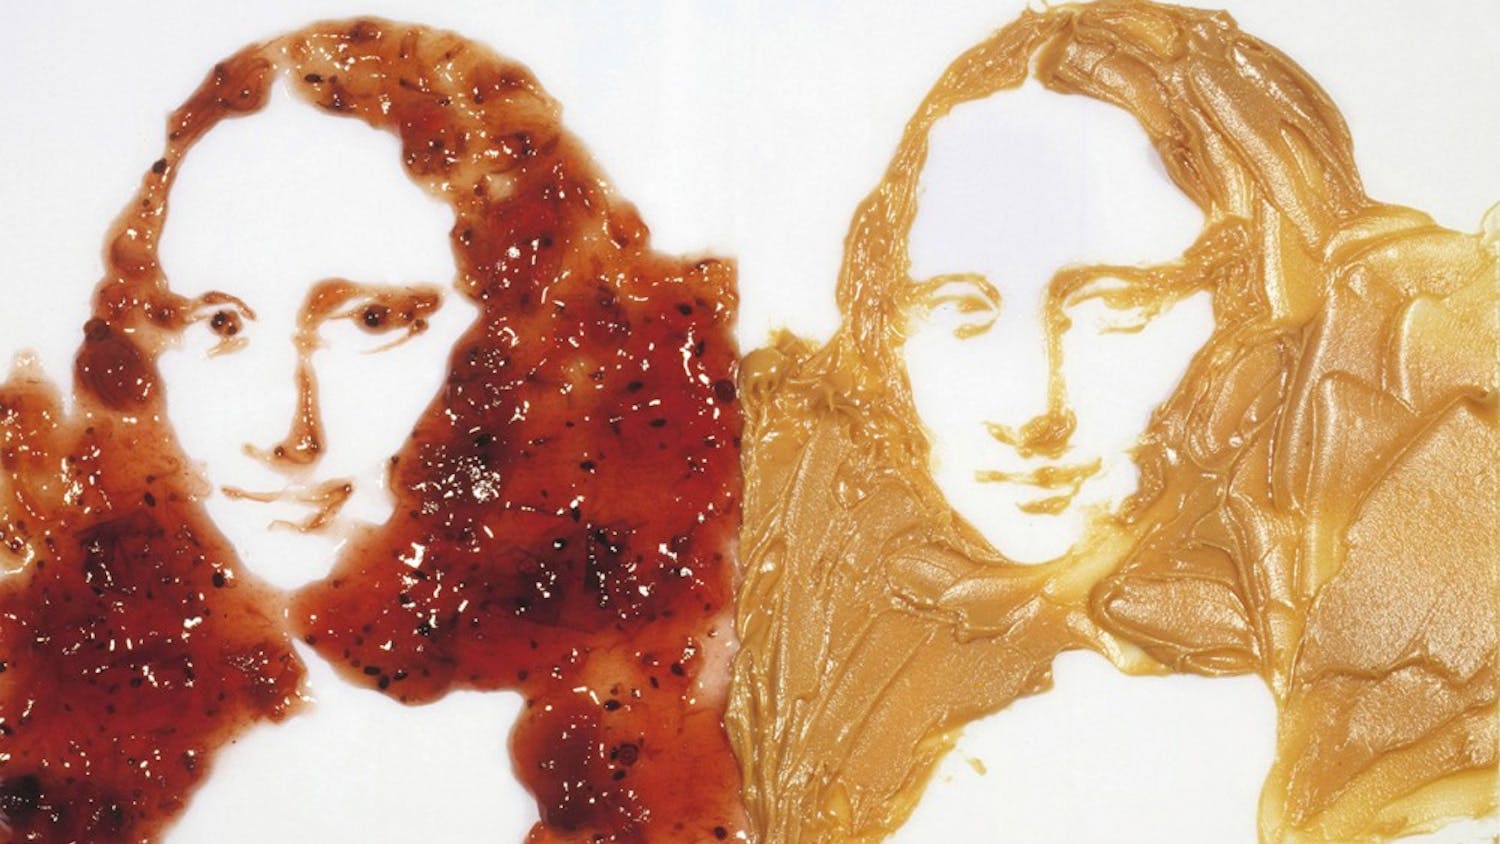 Double Mona Lisa (Peanut Butter and Jelly) from the After Warhol series, 1999. Cibachrome print. Art © Vik Muniz/Licensed by VAGA, New York, NY
 